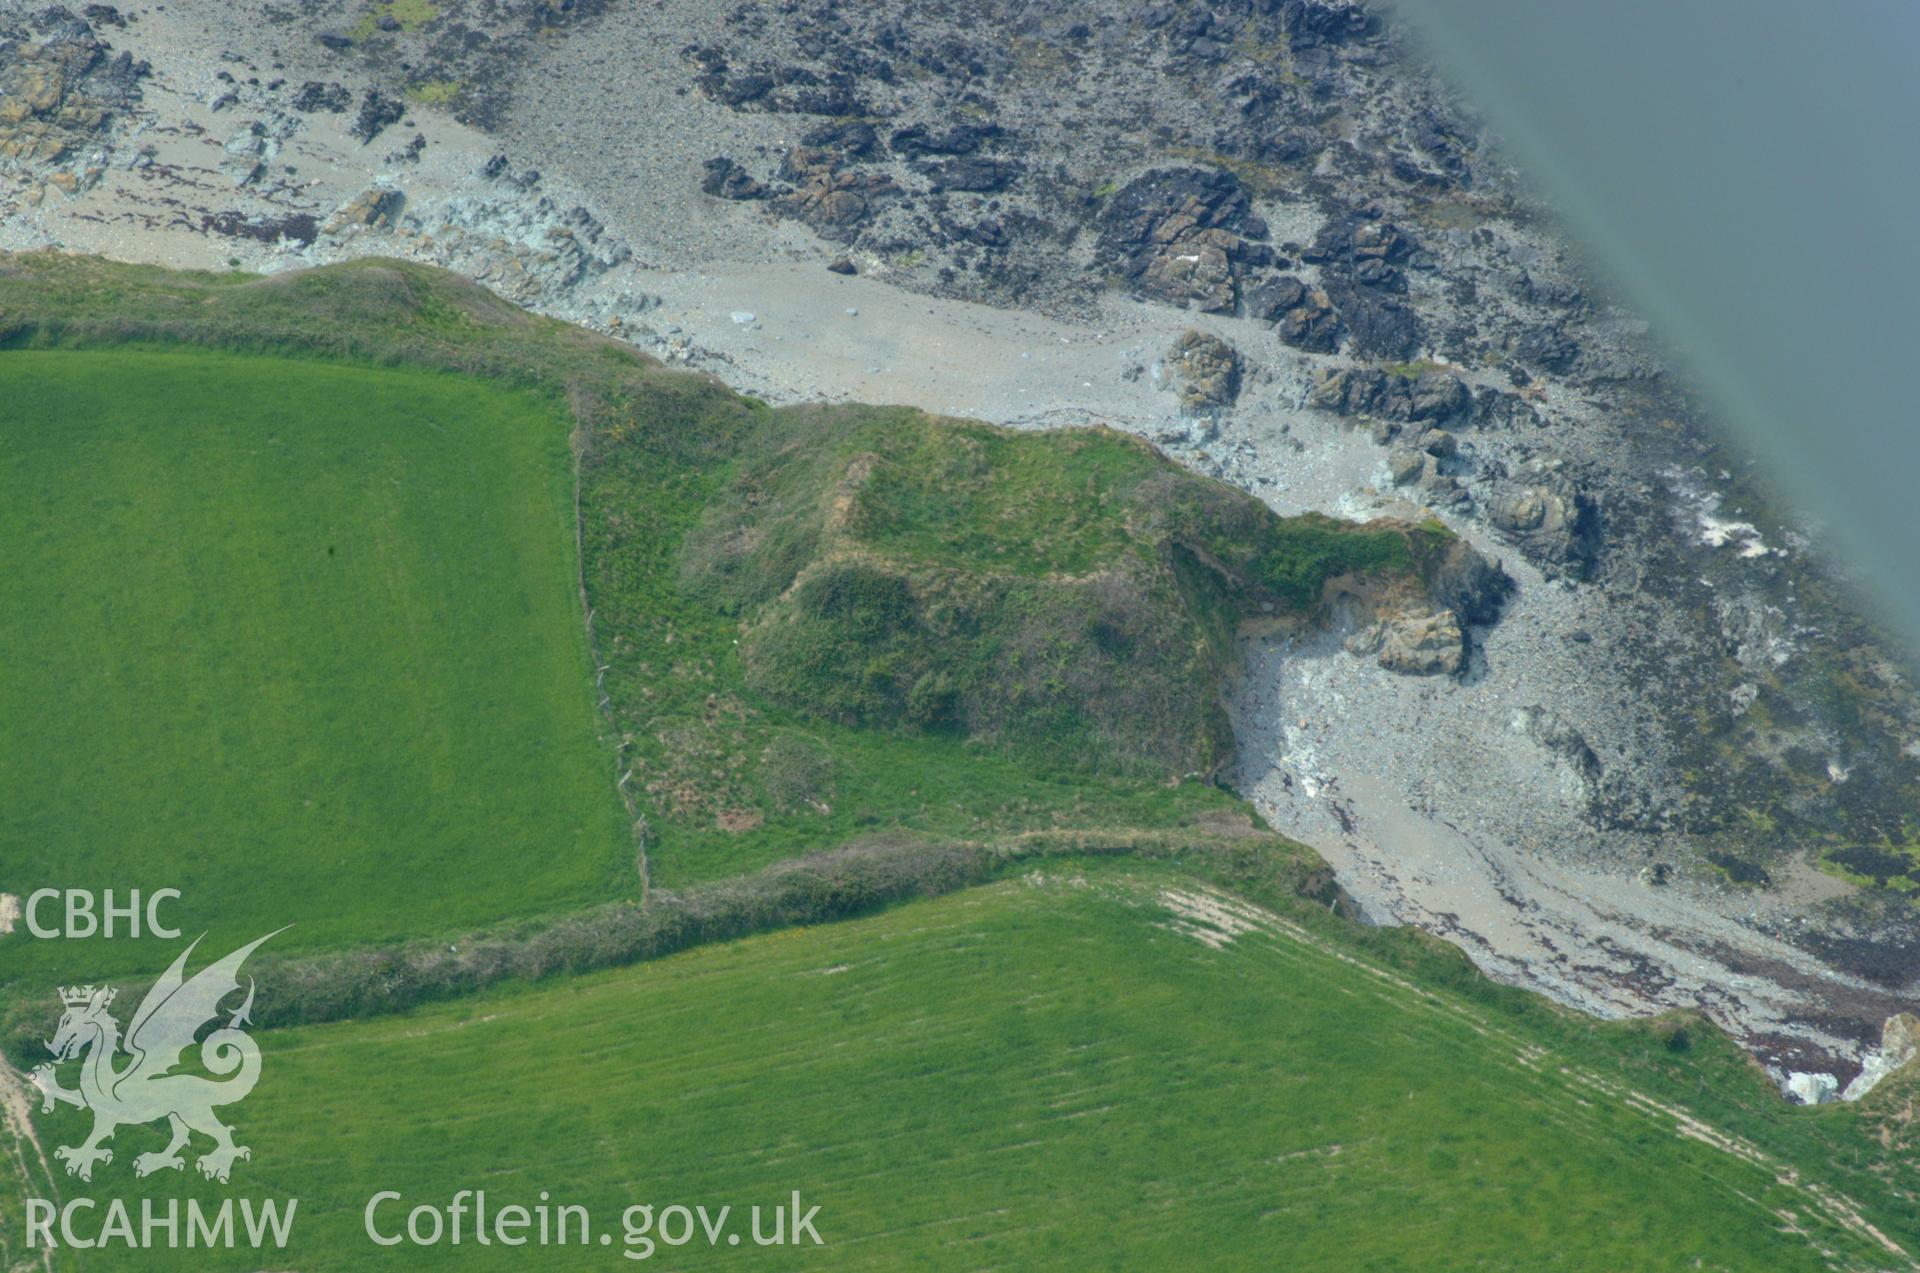 RCAHMW colour oblique aerial photograph of Castell Tre-fadog taken on 26/05/2004 by Toby Driver